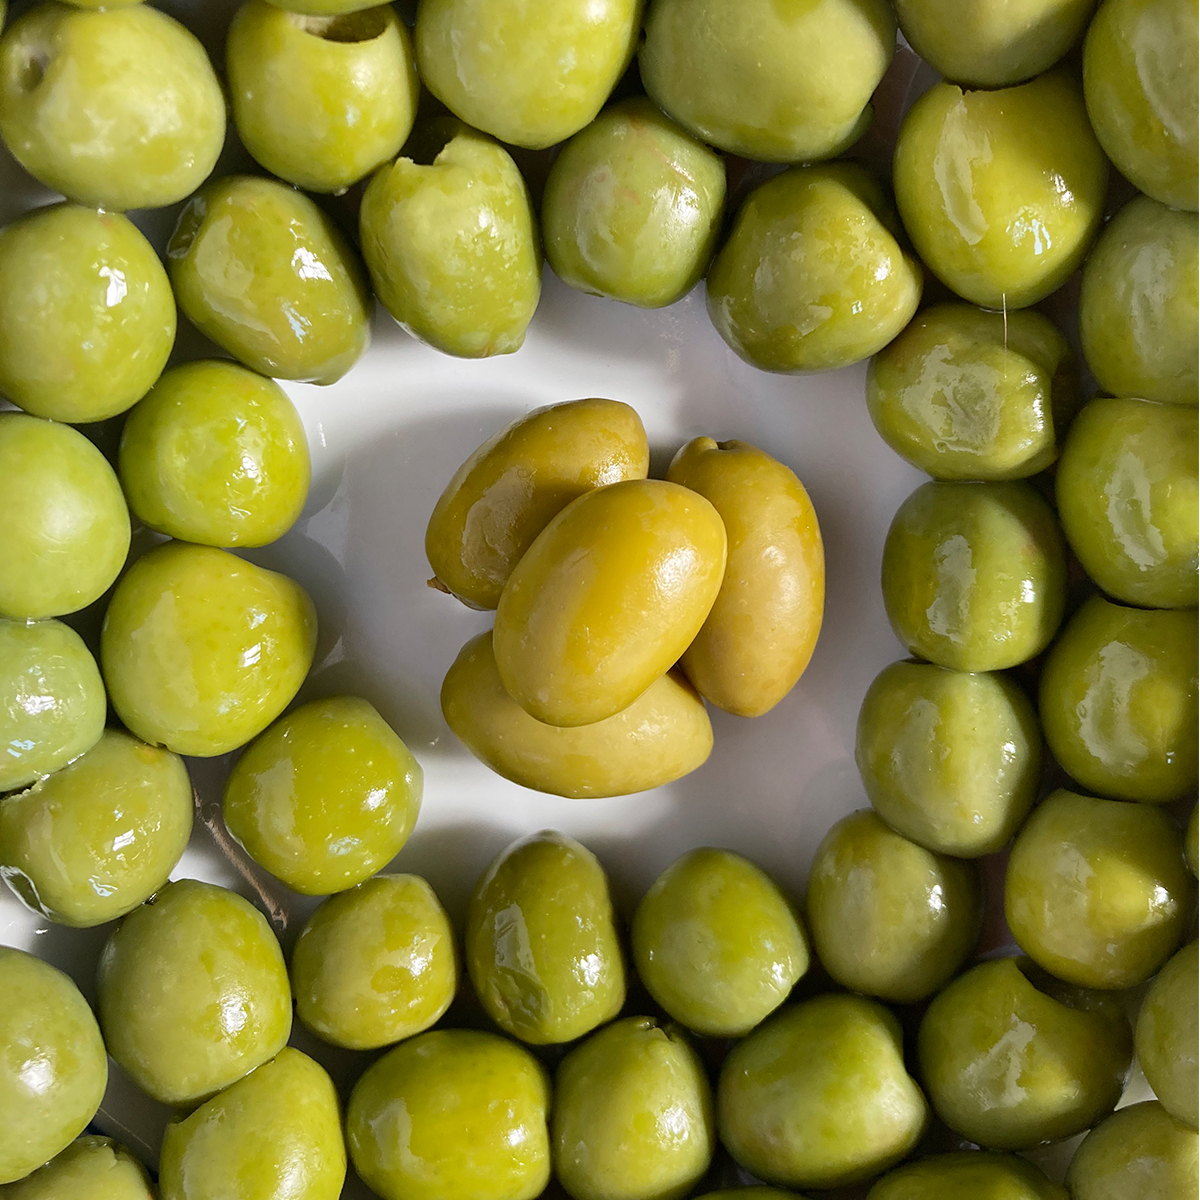 Pianogrillo Castelvetrano olives and other olives